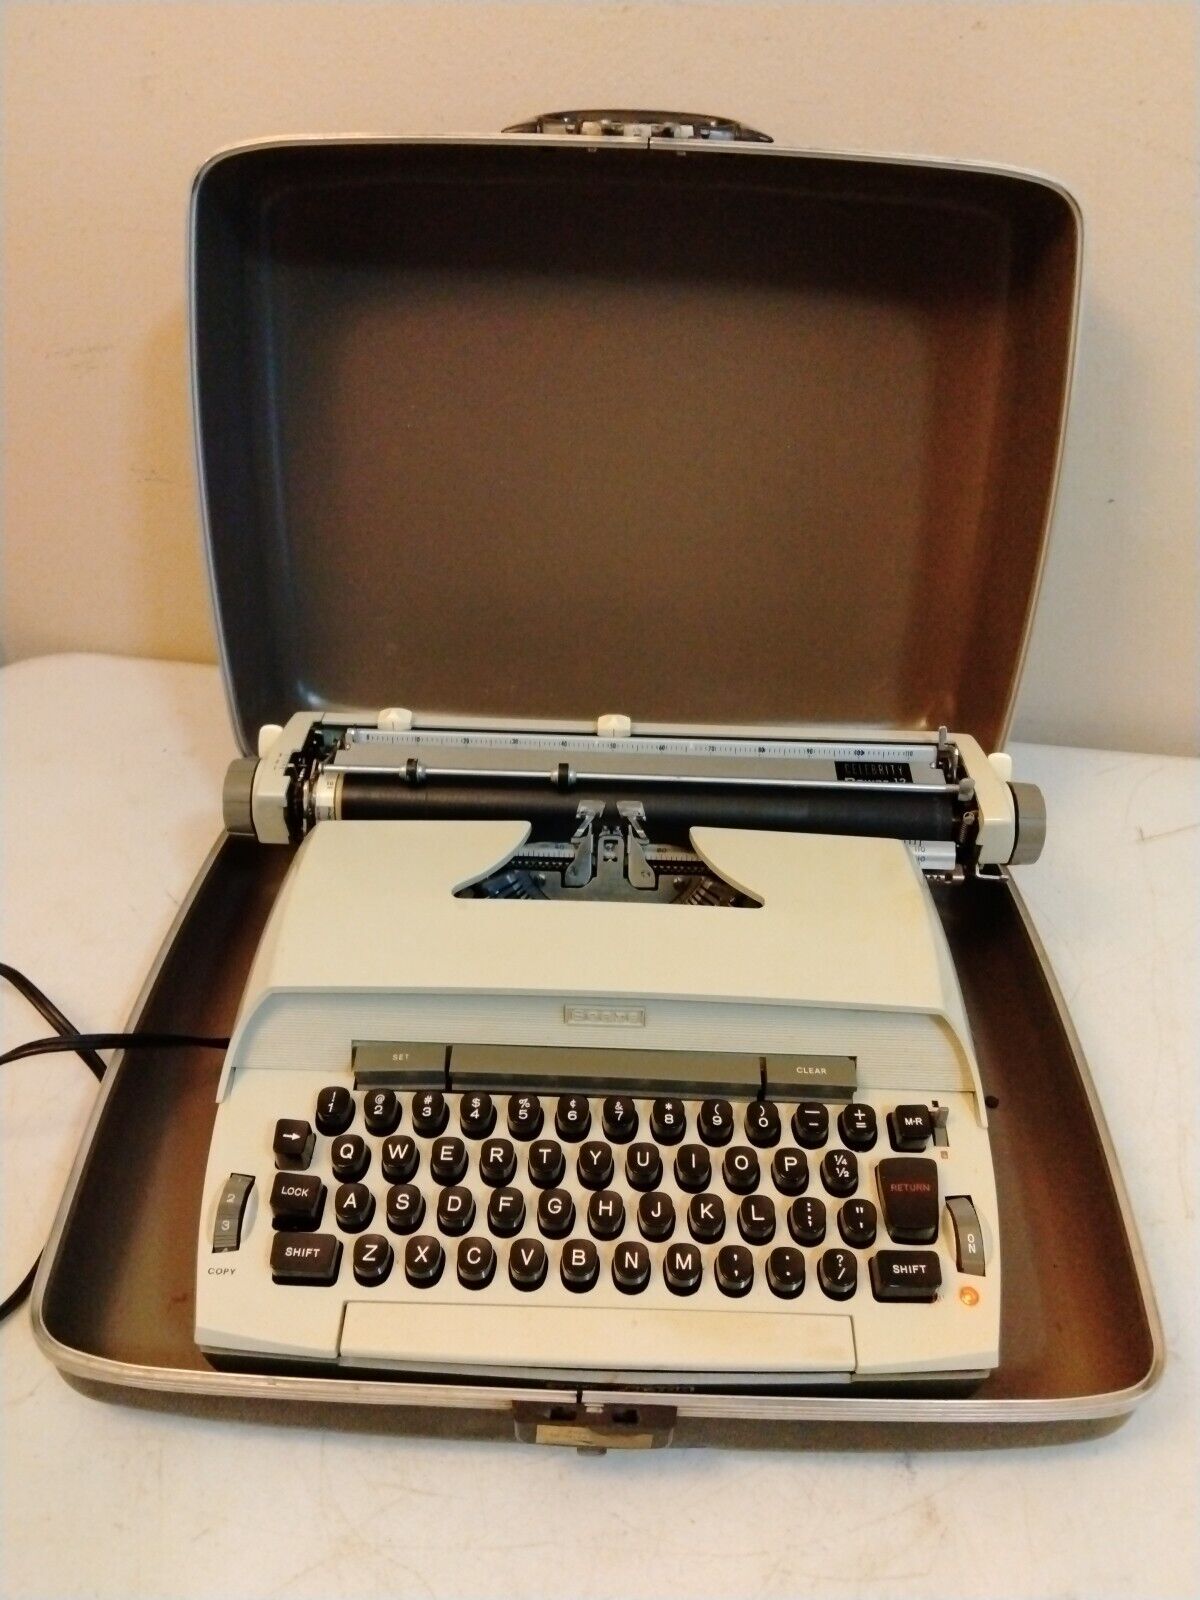 Sears Celebrity Power 12 Vintage Electric Typewriter W/ Case - TESTED/WORKS